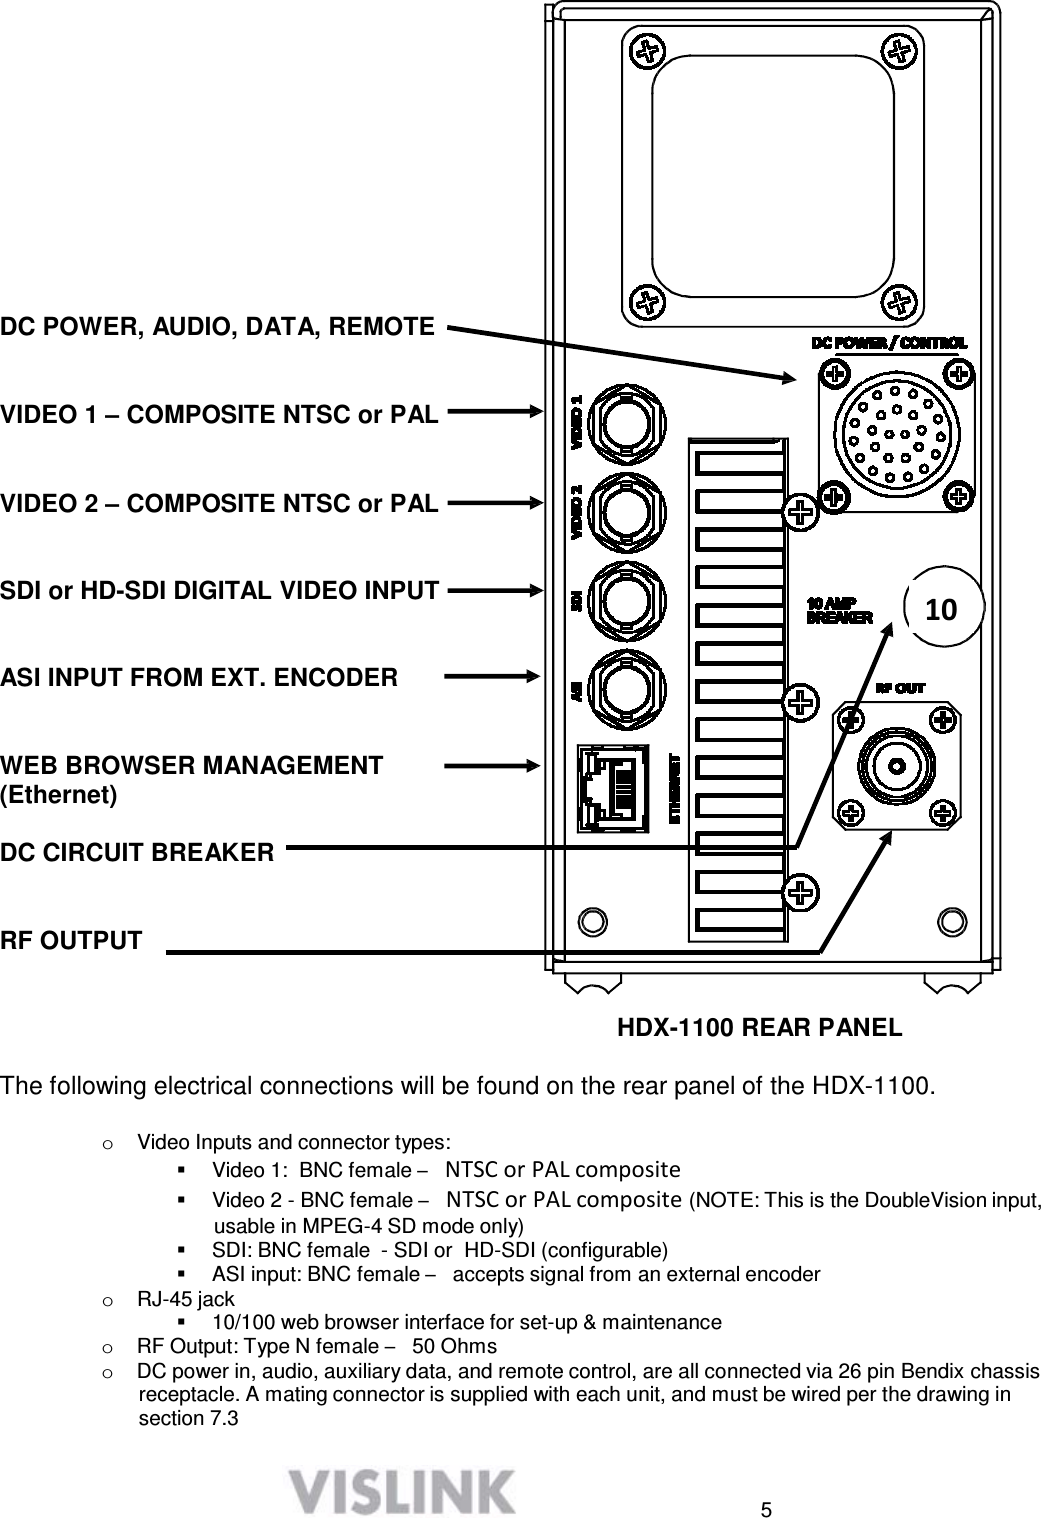  5                   DC POWER, AUDIO, DATA, REMOTE VIDEO 1 – COMPOSITE NTSC or PAL VIDEO 2 – COMPOSITE NTSC or PAL    SDI or HD-SDI DIGITAL VIDEO INPUT 10   ASI INPUT FROM EXT. ENCODER    WEB BROWSER MANAGEMENT (Ethernet)  DC CIRCUIT BREAKER    RF OUTPUT    HDX-1100 REAR PANEL  The following electrical connections will be found on the rear panel of the HDX-1100.  o  Video Inputs and connector types:    Video 1:  BNC female –  NTSC or PAL composite    Video 2 - BNC female –  NTSC or PAL composite (NOTE: This is the DoubleVision input, usable in MPEG-4 SD mode only)    SDI: BNC female  - SDI or  HD-SDI (configurable)    ASI input: BNC female –  accepts signal from an external encoder o  RJ-45 jack    10/100 web browser interface for set-up &amp; maintenance o  RF Output: Type N female –  50 Ohms o  DC power in, audio, auxiliary data, and remote control, are all connected via 26 pin Bendix chassis receptacle. A mating connector is supplied with each unit, and must be wired per the drawing in section 7.3 